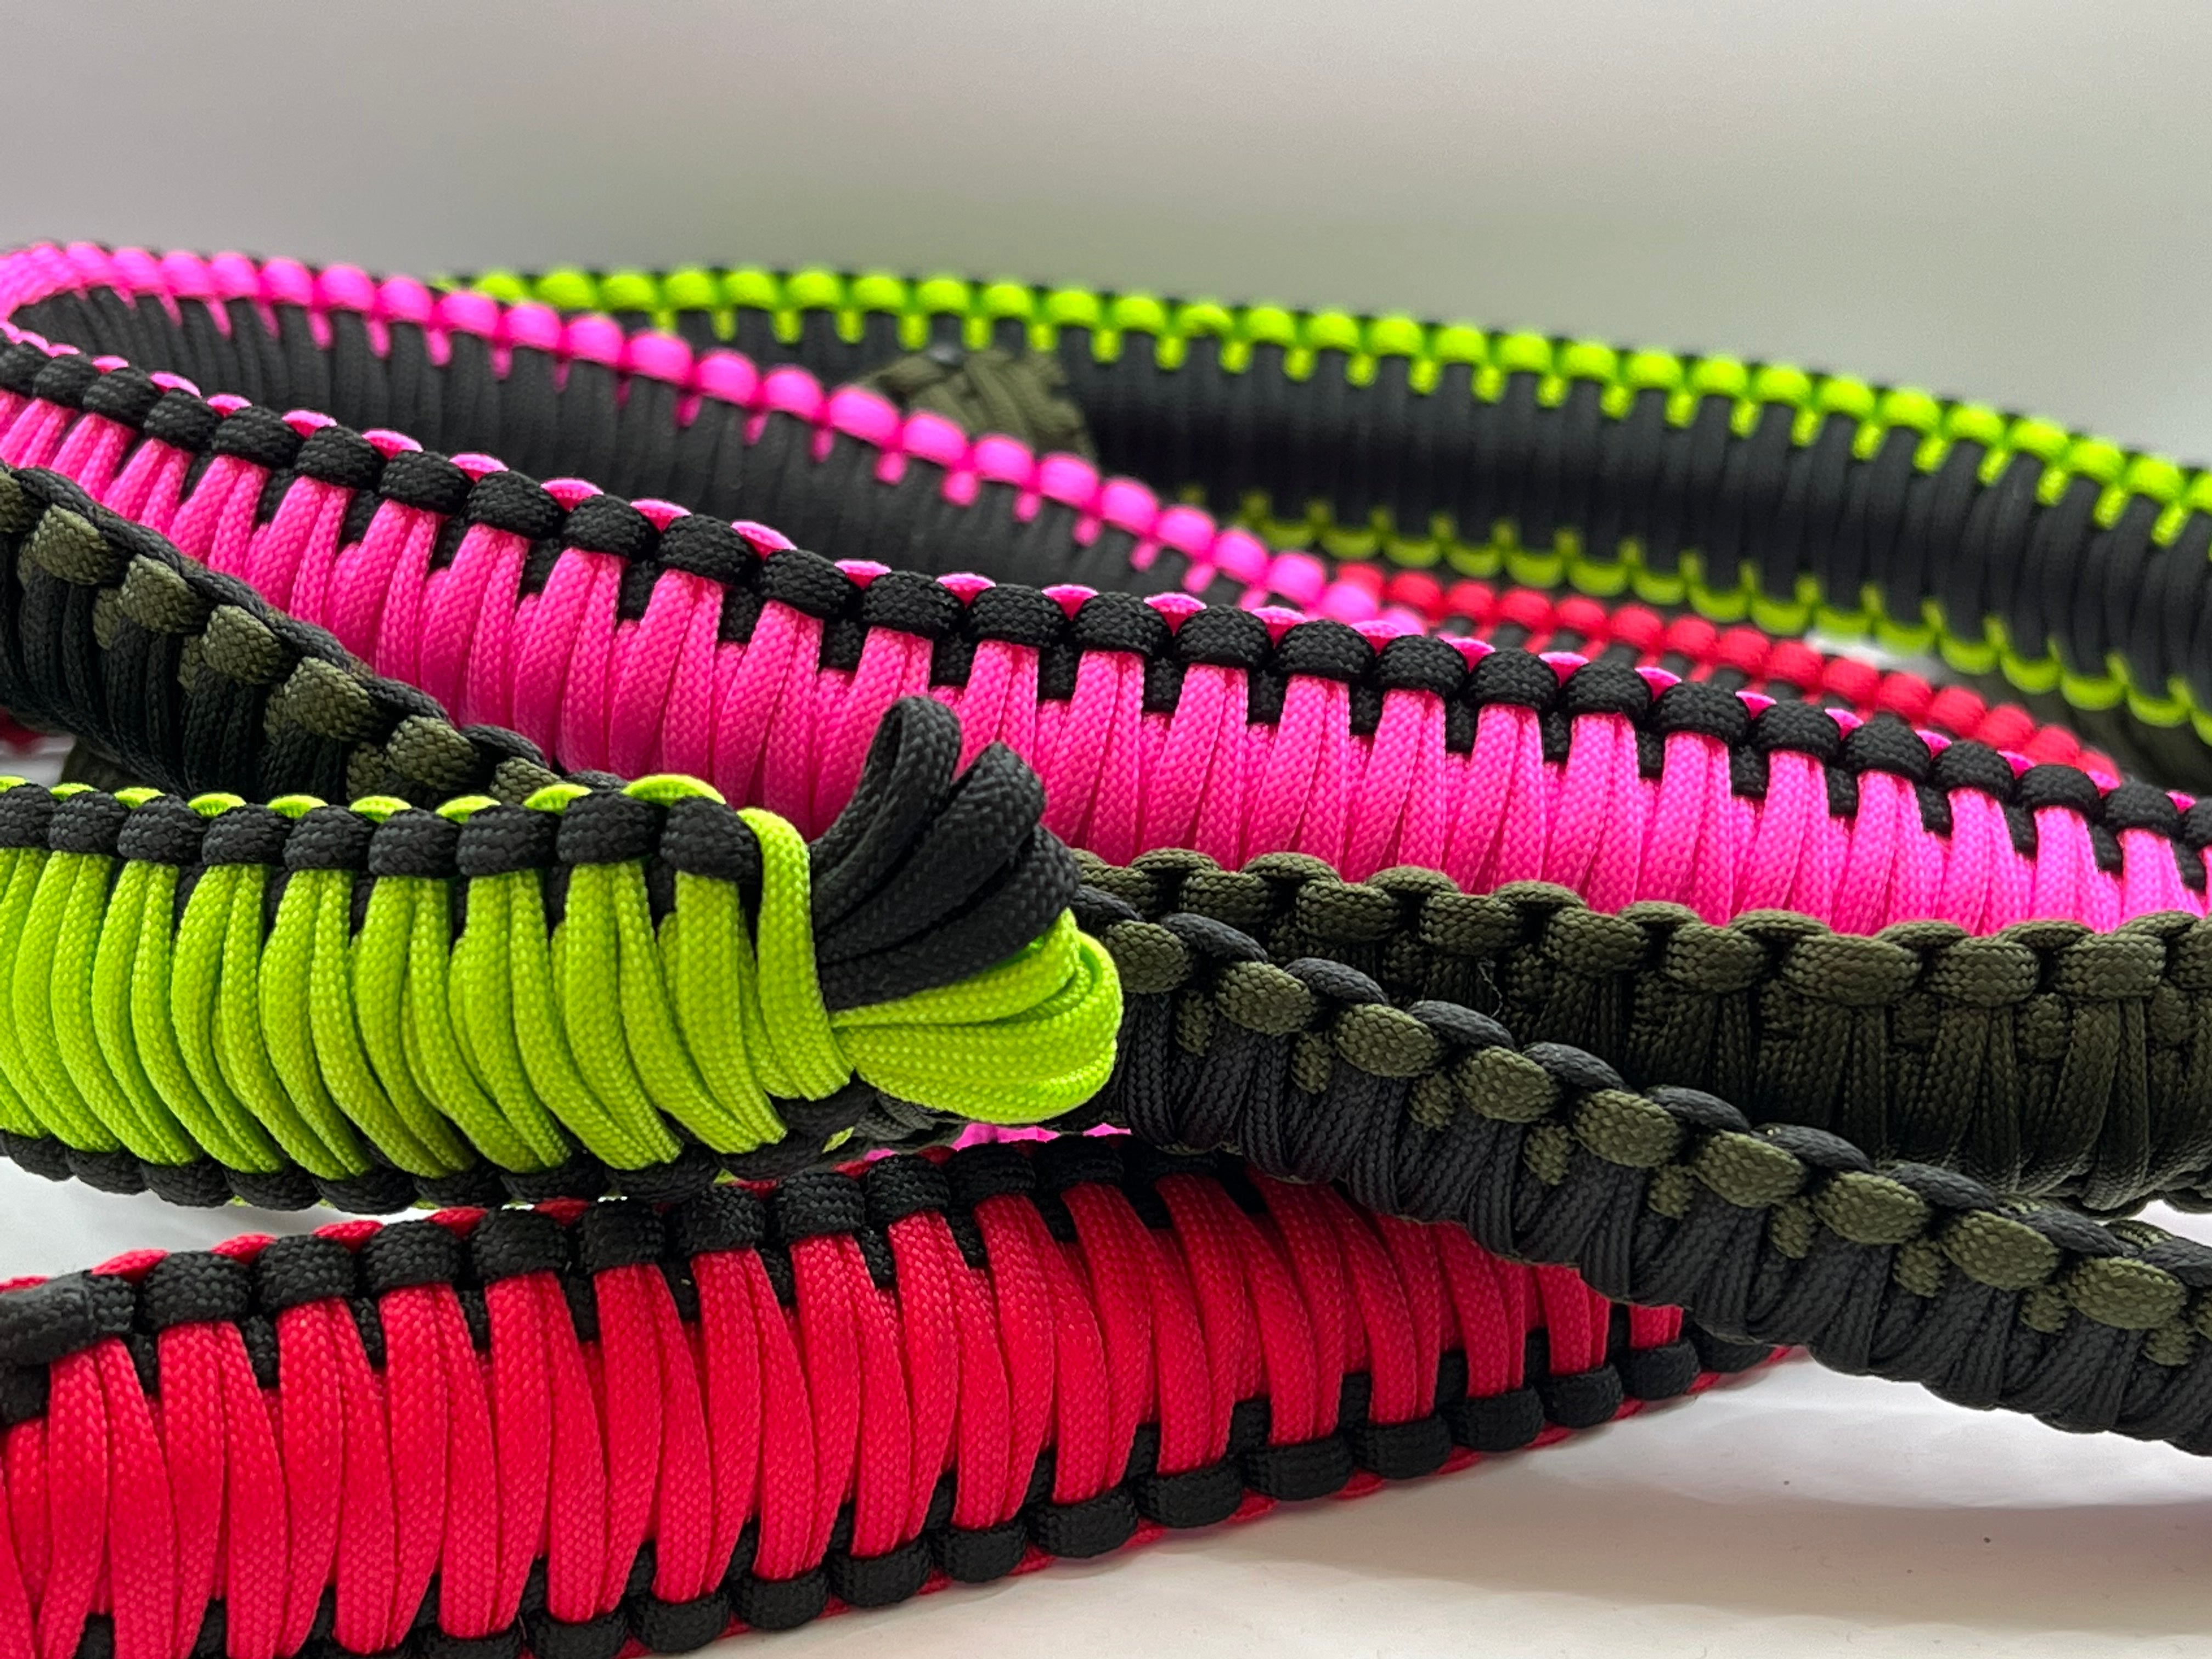 Product SALE 19.99 ALL Paracord Tow Ropes Hardware $7.99 Discontinue